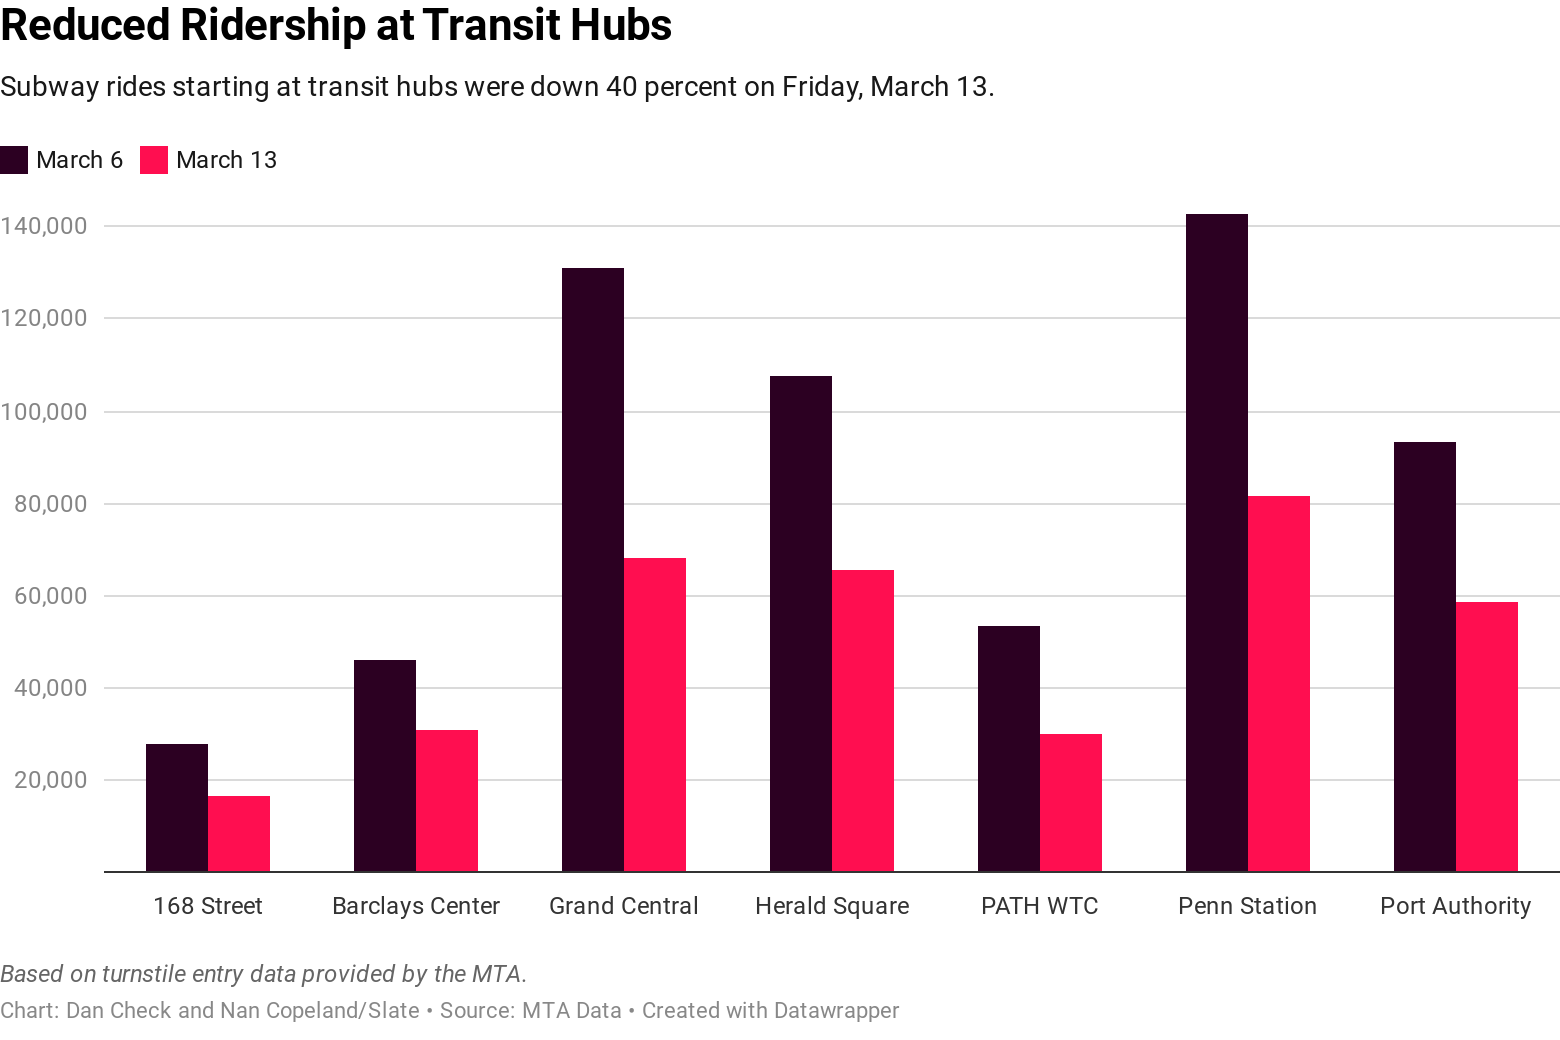 Major transit hubs saw a decline in subway entries of over 40%.